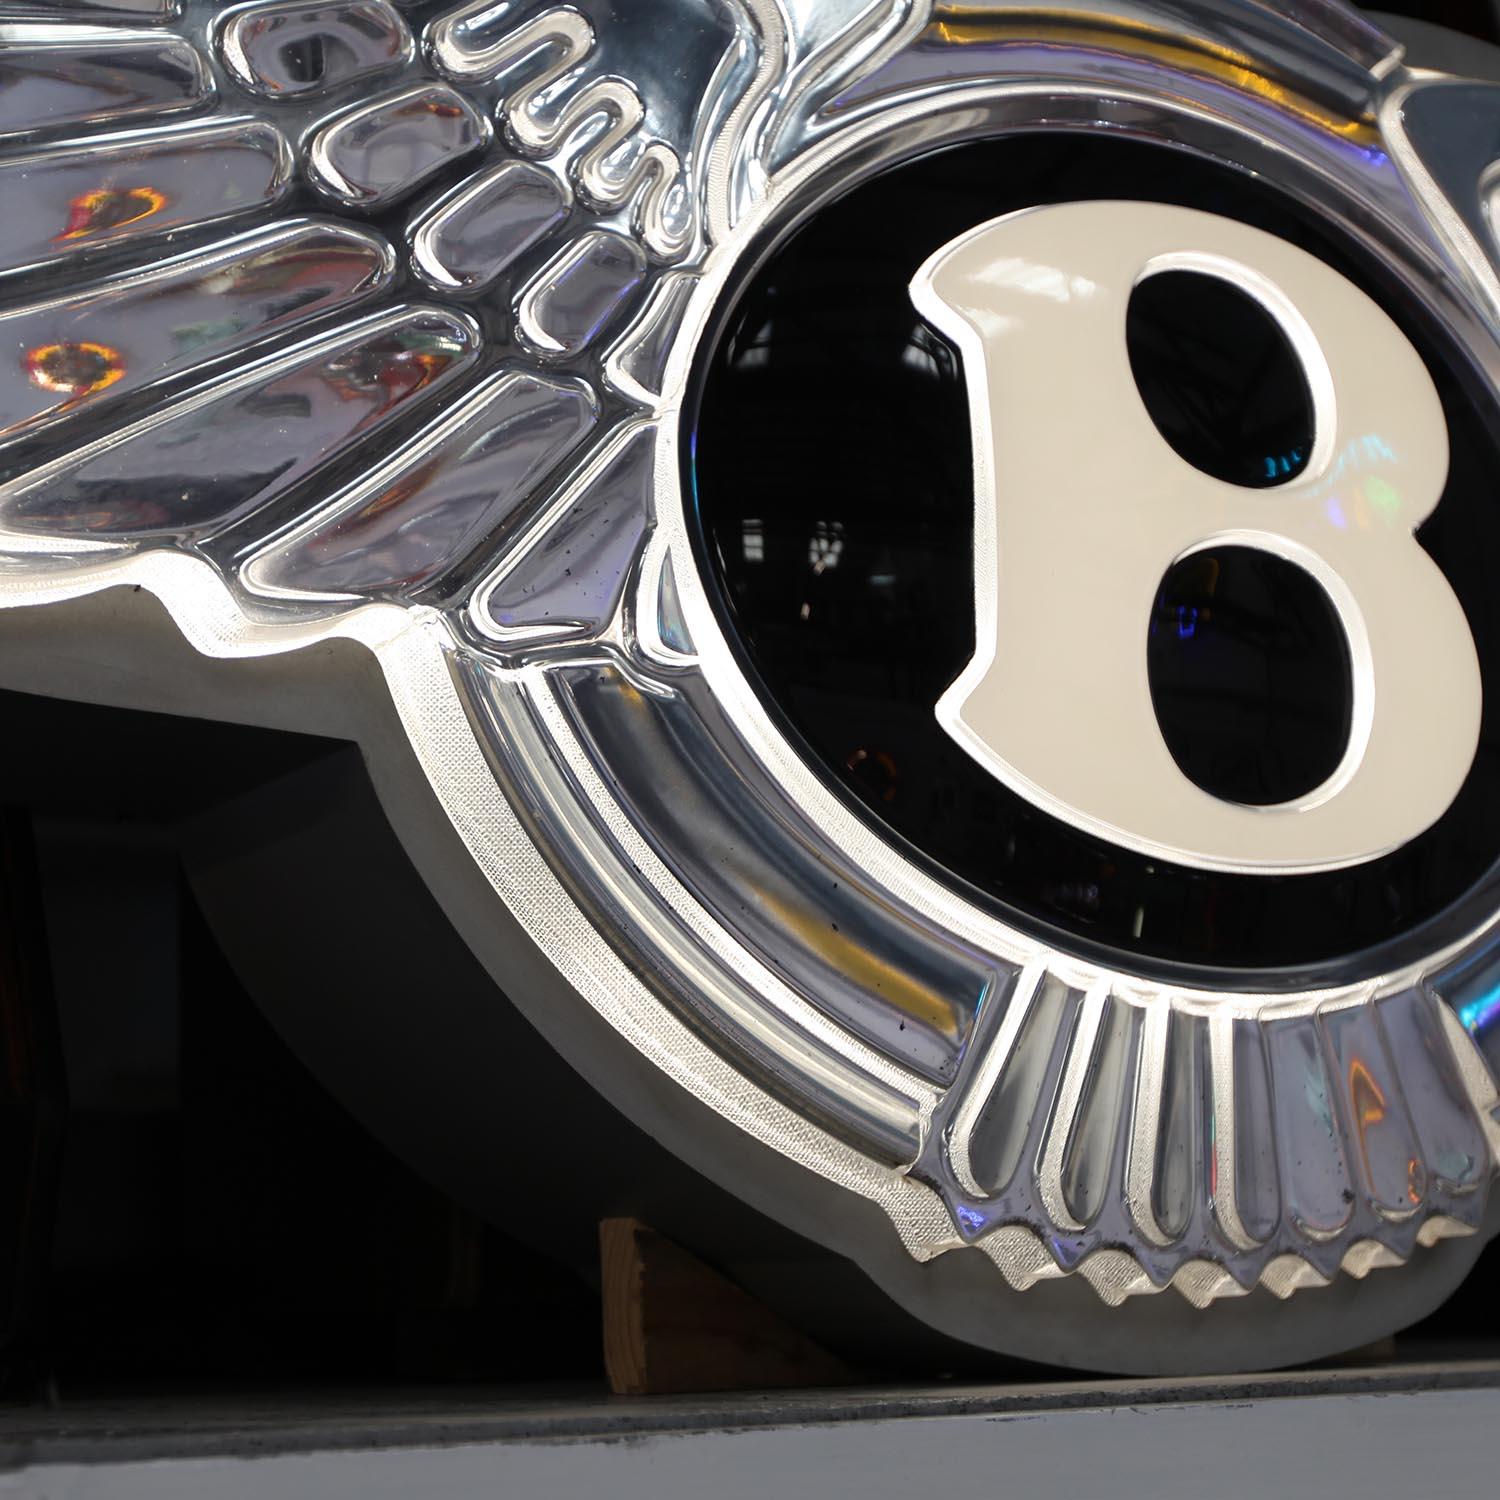 This stunning sign features the iconic Bentley winged motif and was originally created for the Exeter dealership, which was owned by Danny Donovan of Straight Eight. Manufactured in metal and plastic, it is cleverly lit from within so that both the